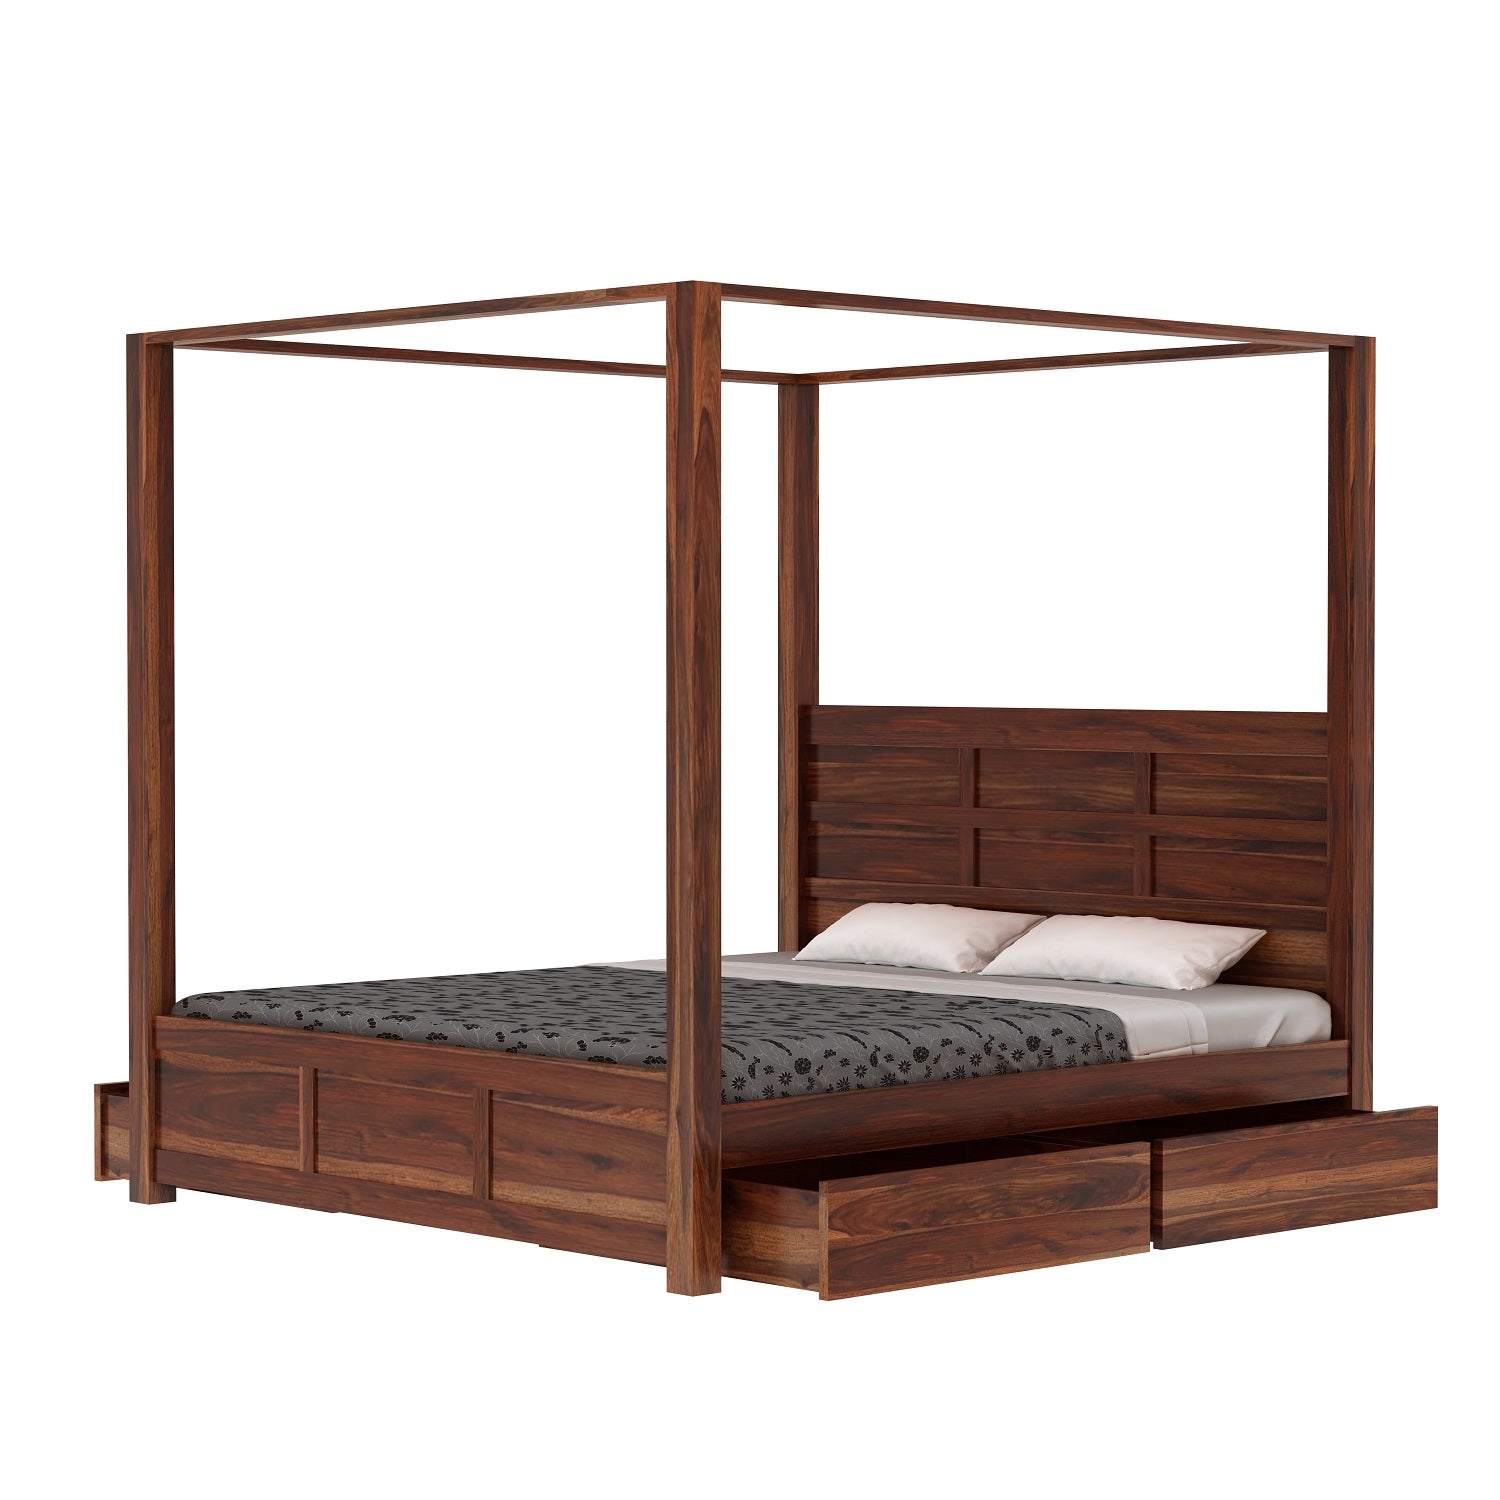 Woodwing Solid Sheesham Wood Poster Bed With Four Drawers (Queen Size, Natural Finish)